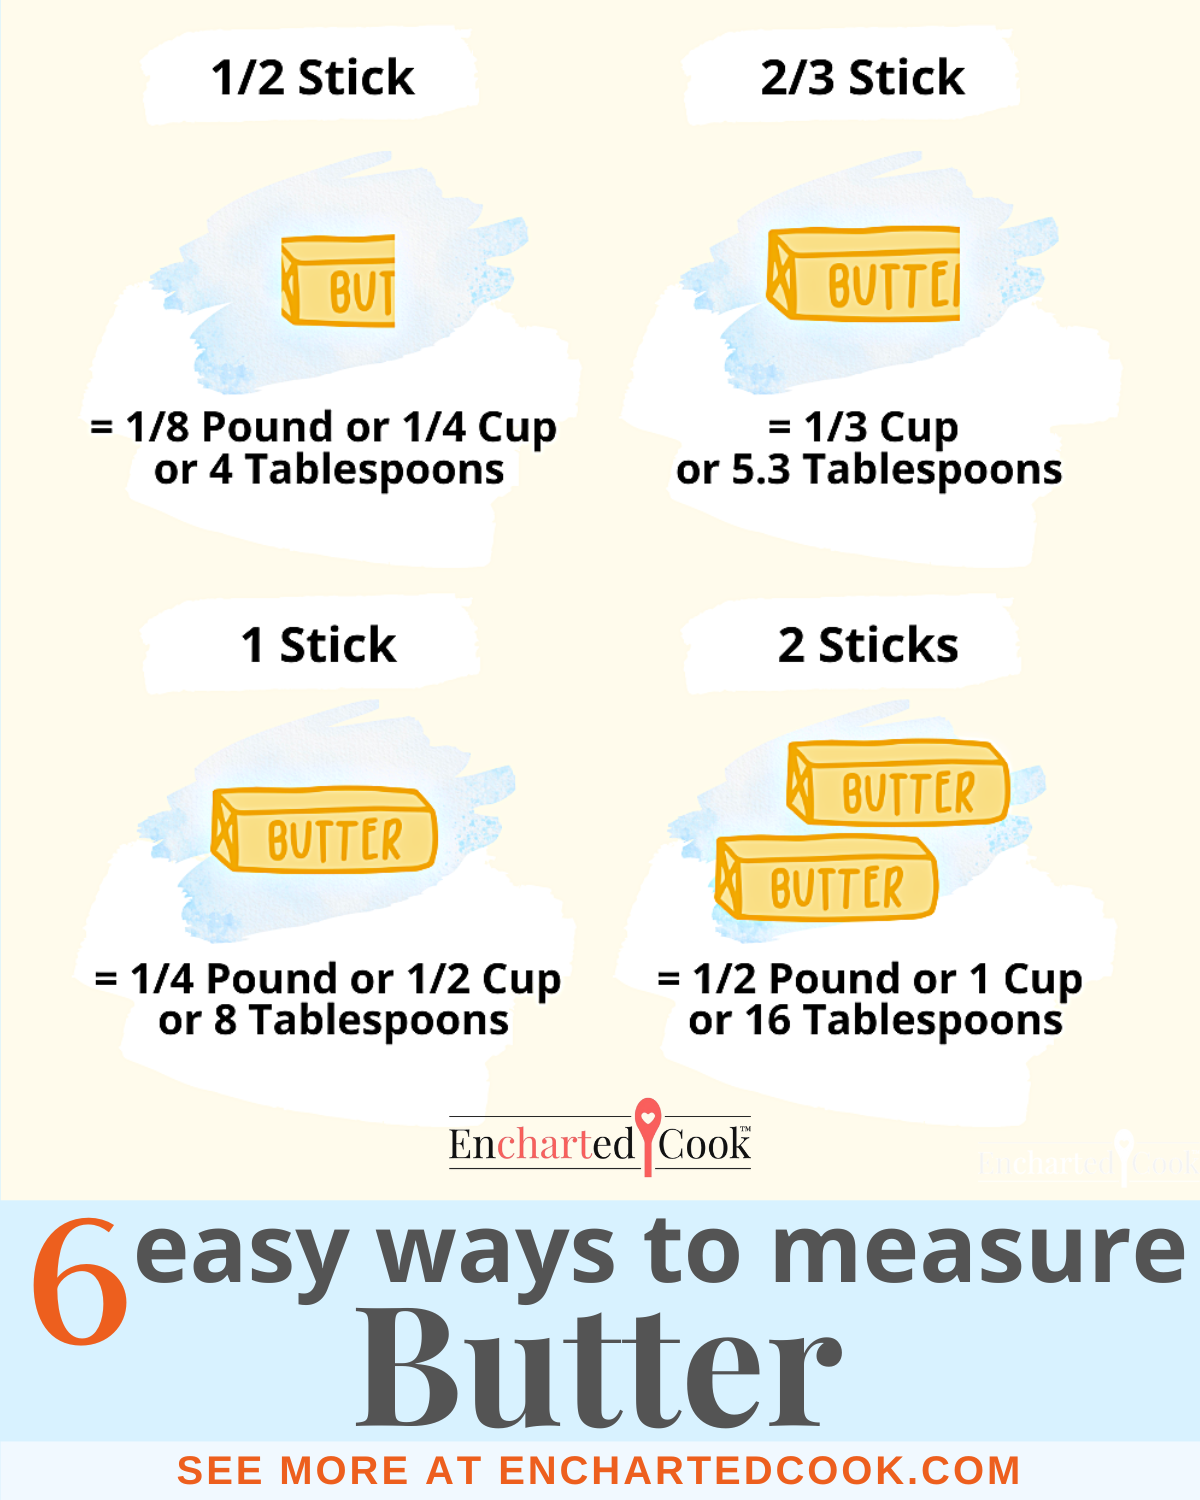 How Many Tablespoons in a Cup, Half Cup, Quarter Cup, Cup of Butter